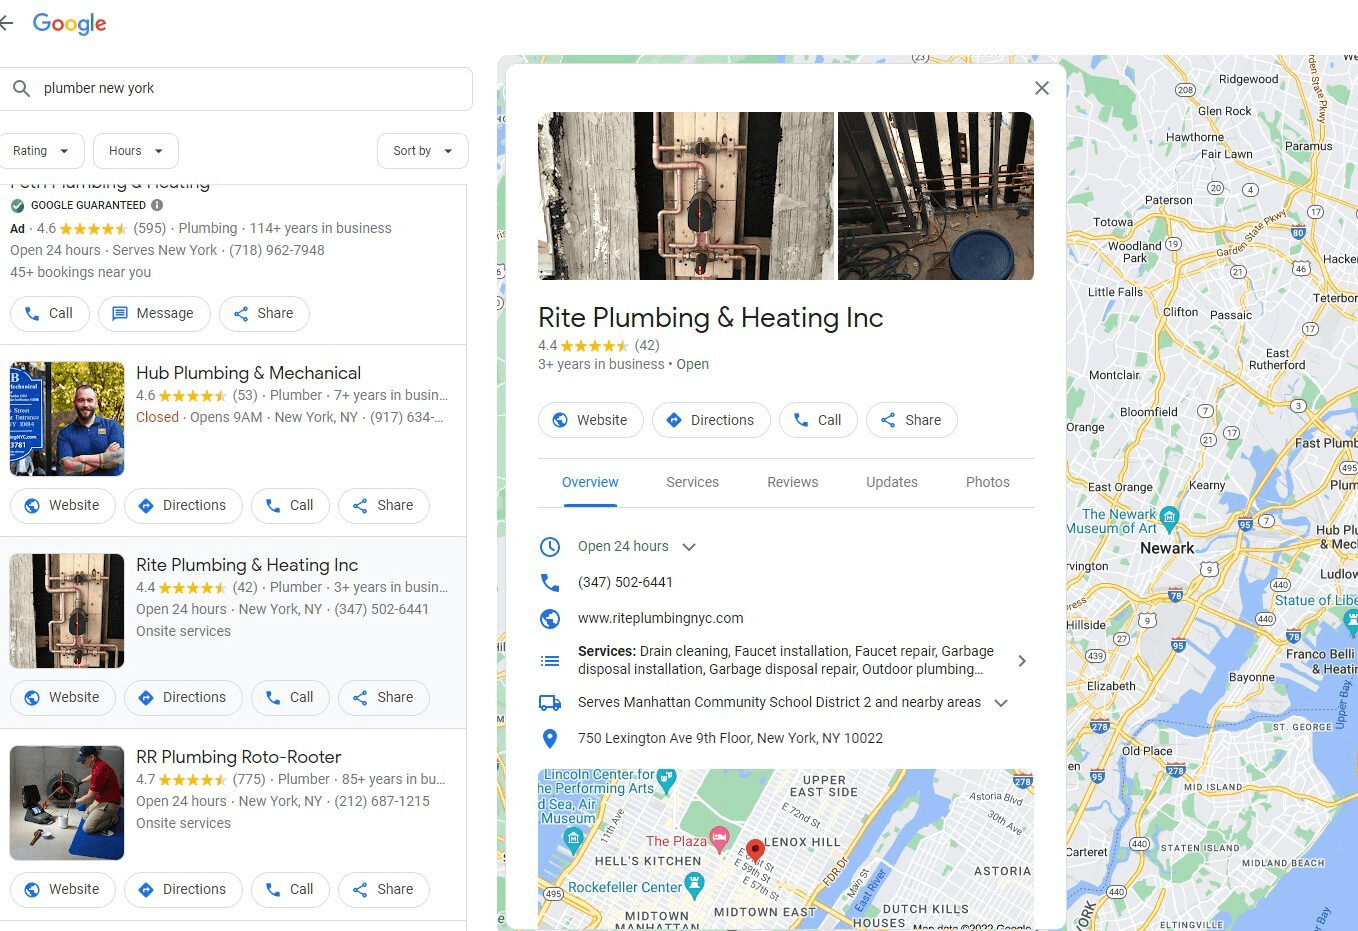 An example of a local listing from Rite Plumbing and Heating on Google